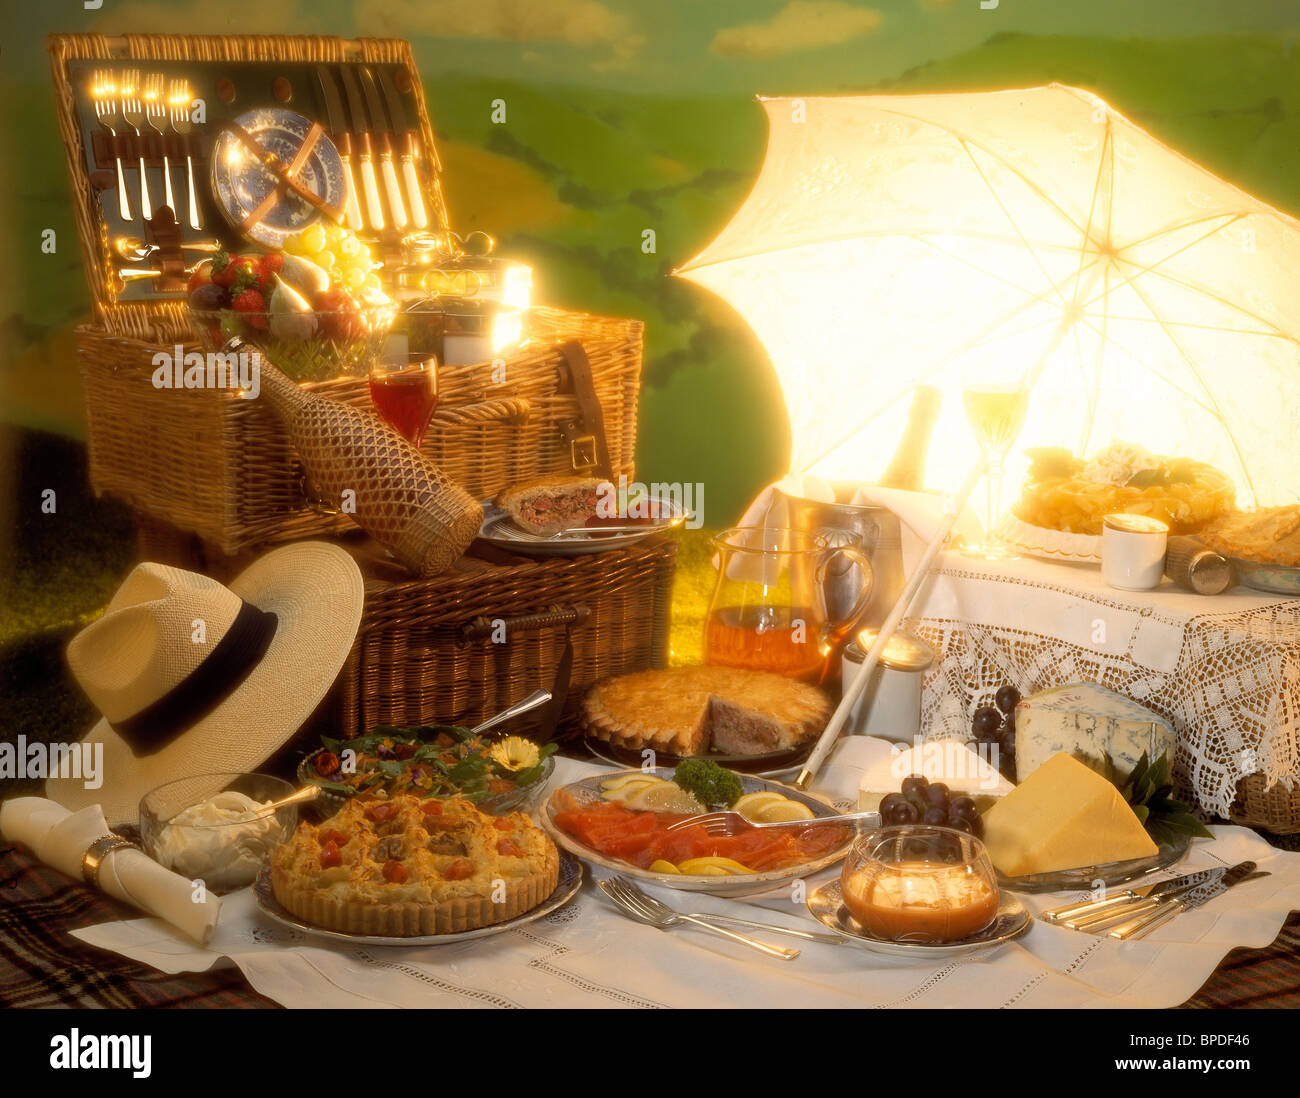 English classic picnic with hamper & food on grass under parasol Stock  Photo - Alamy